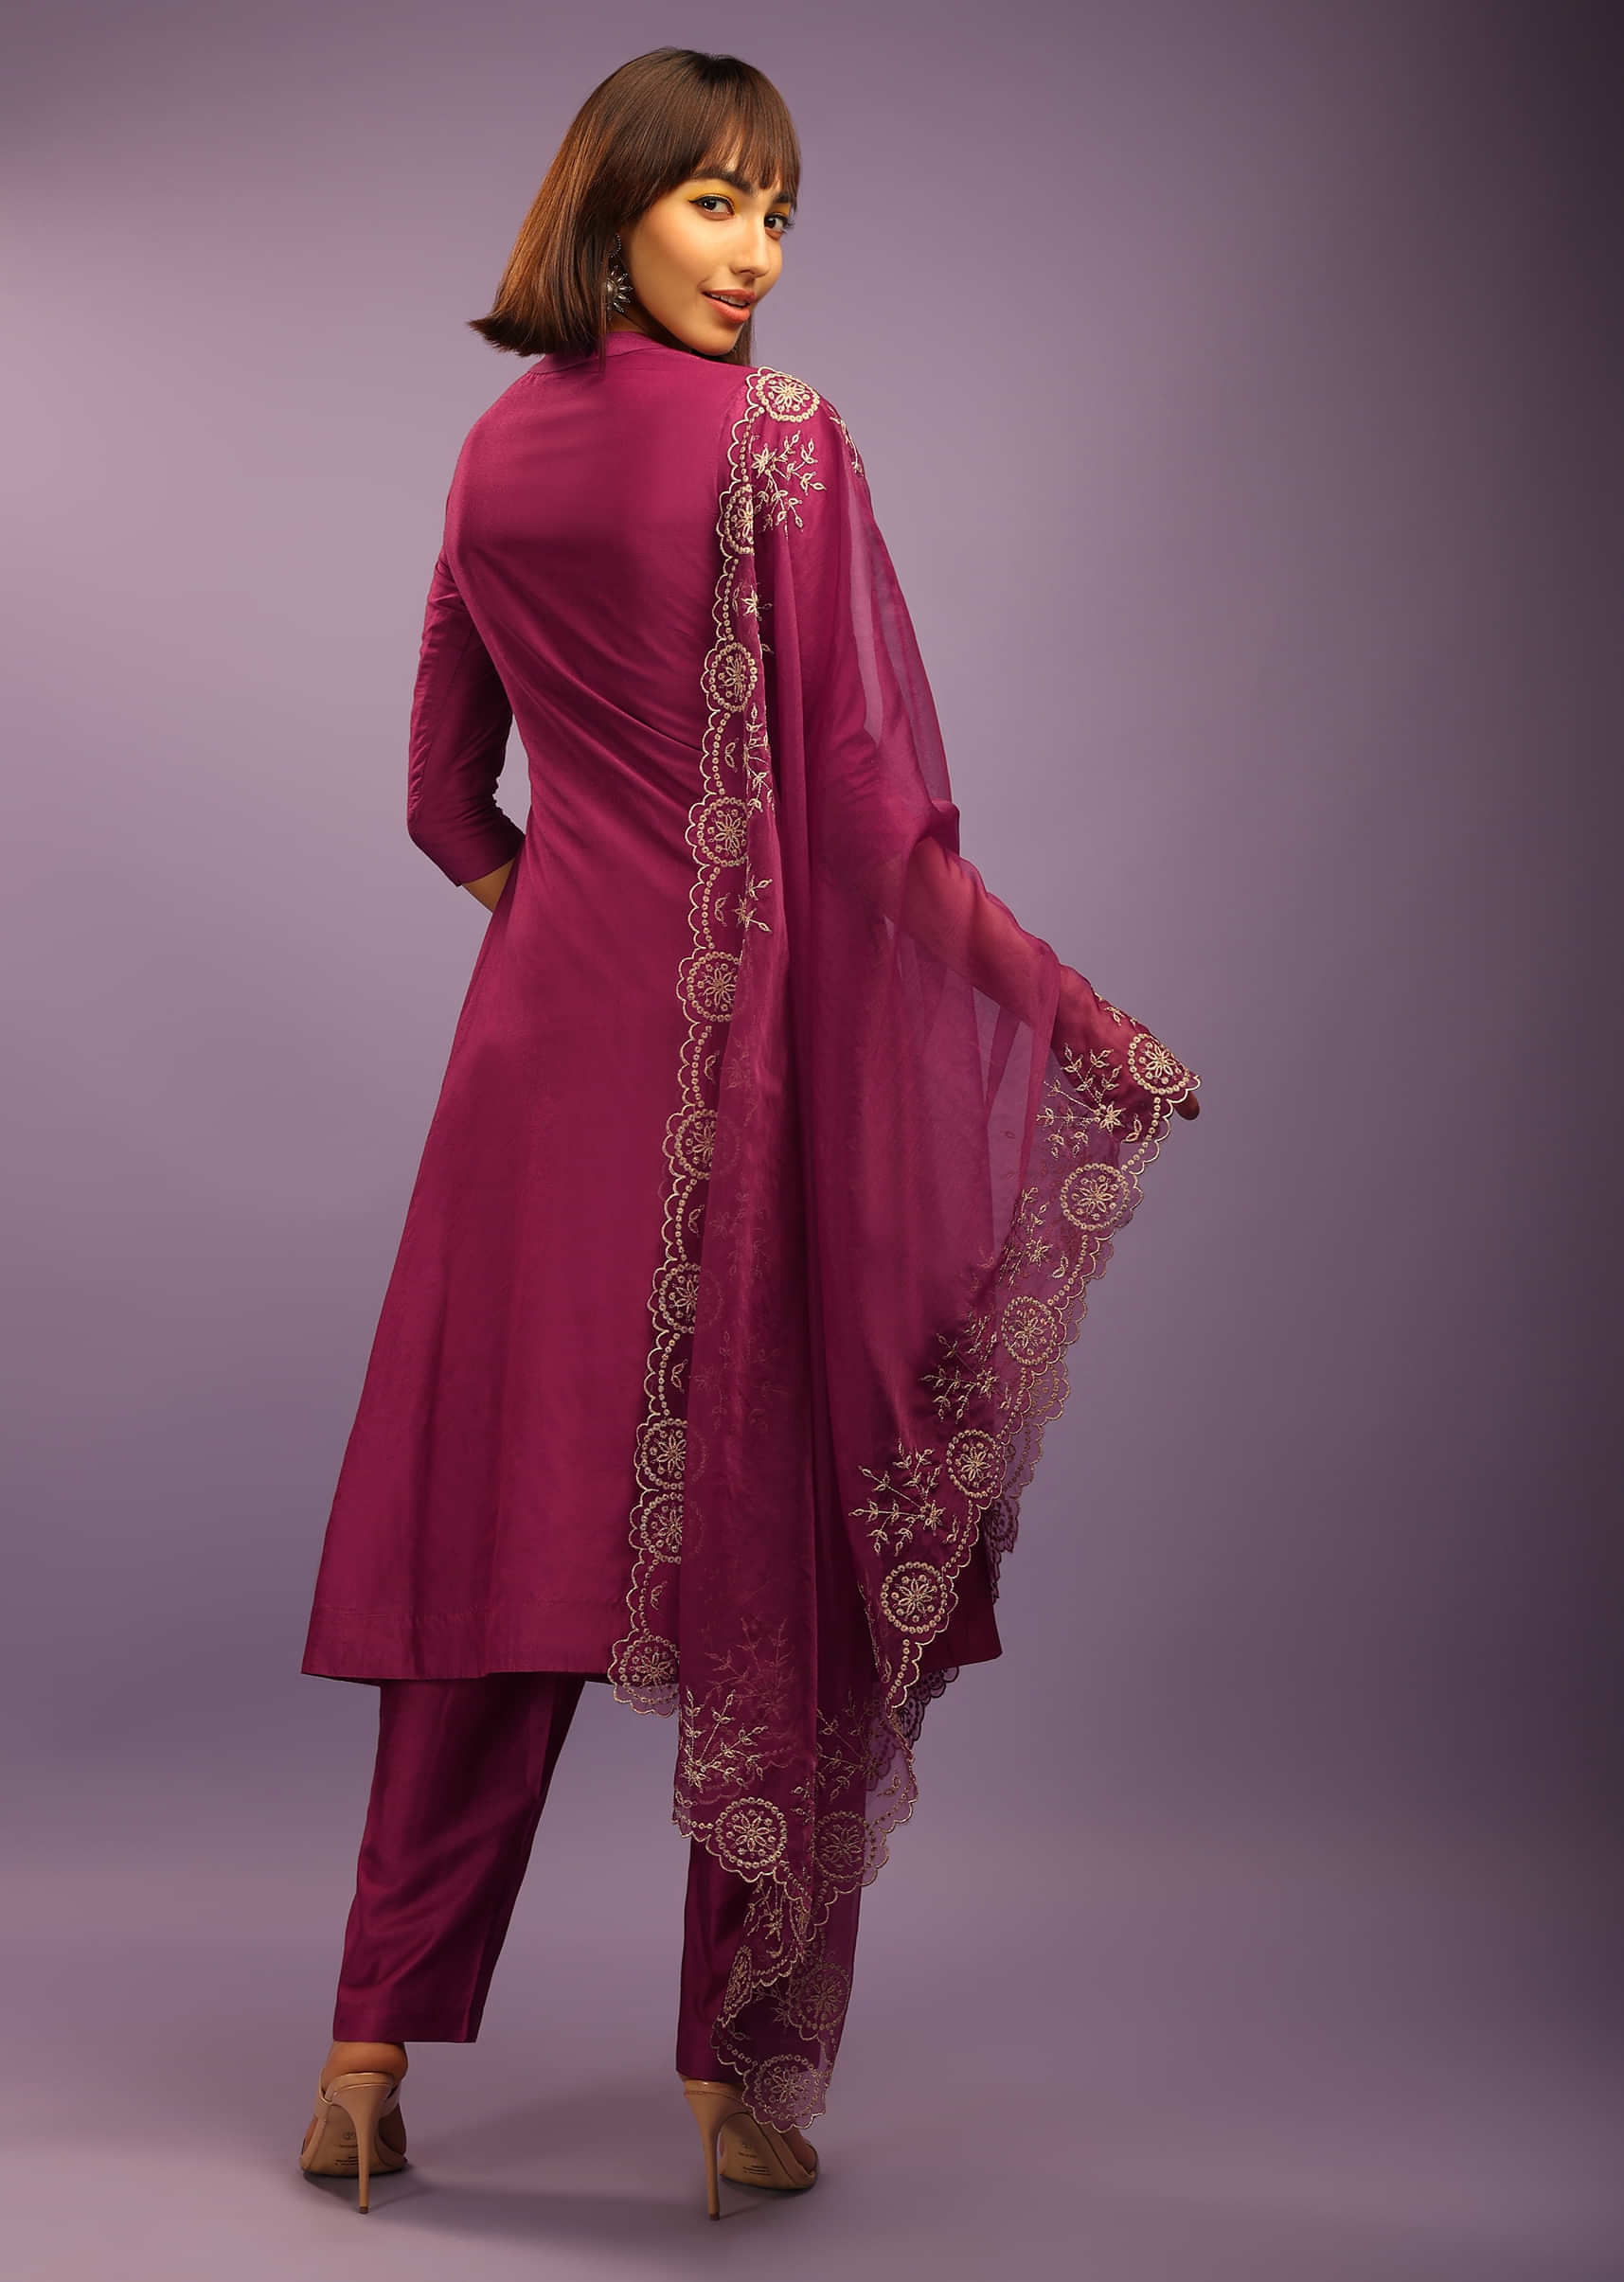 Cranberry Purple A Line Suit In Chanderi Cotton With Pin Tucks Detailing And A Zari Embroidered Organza Dupatta